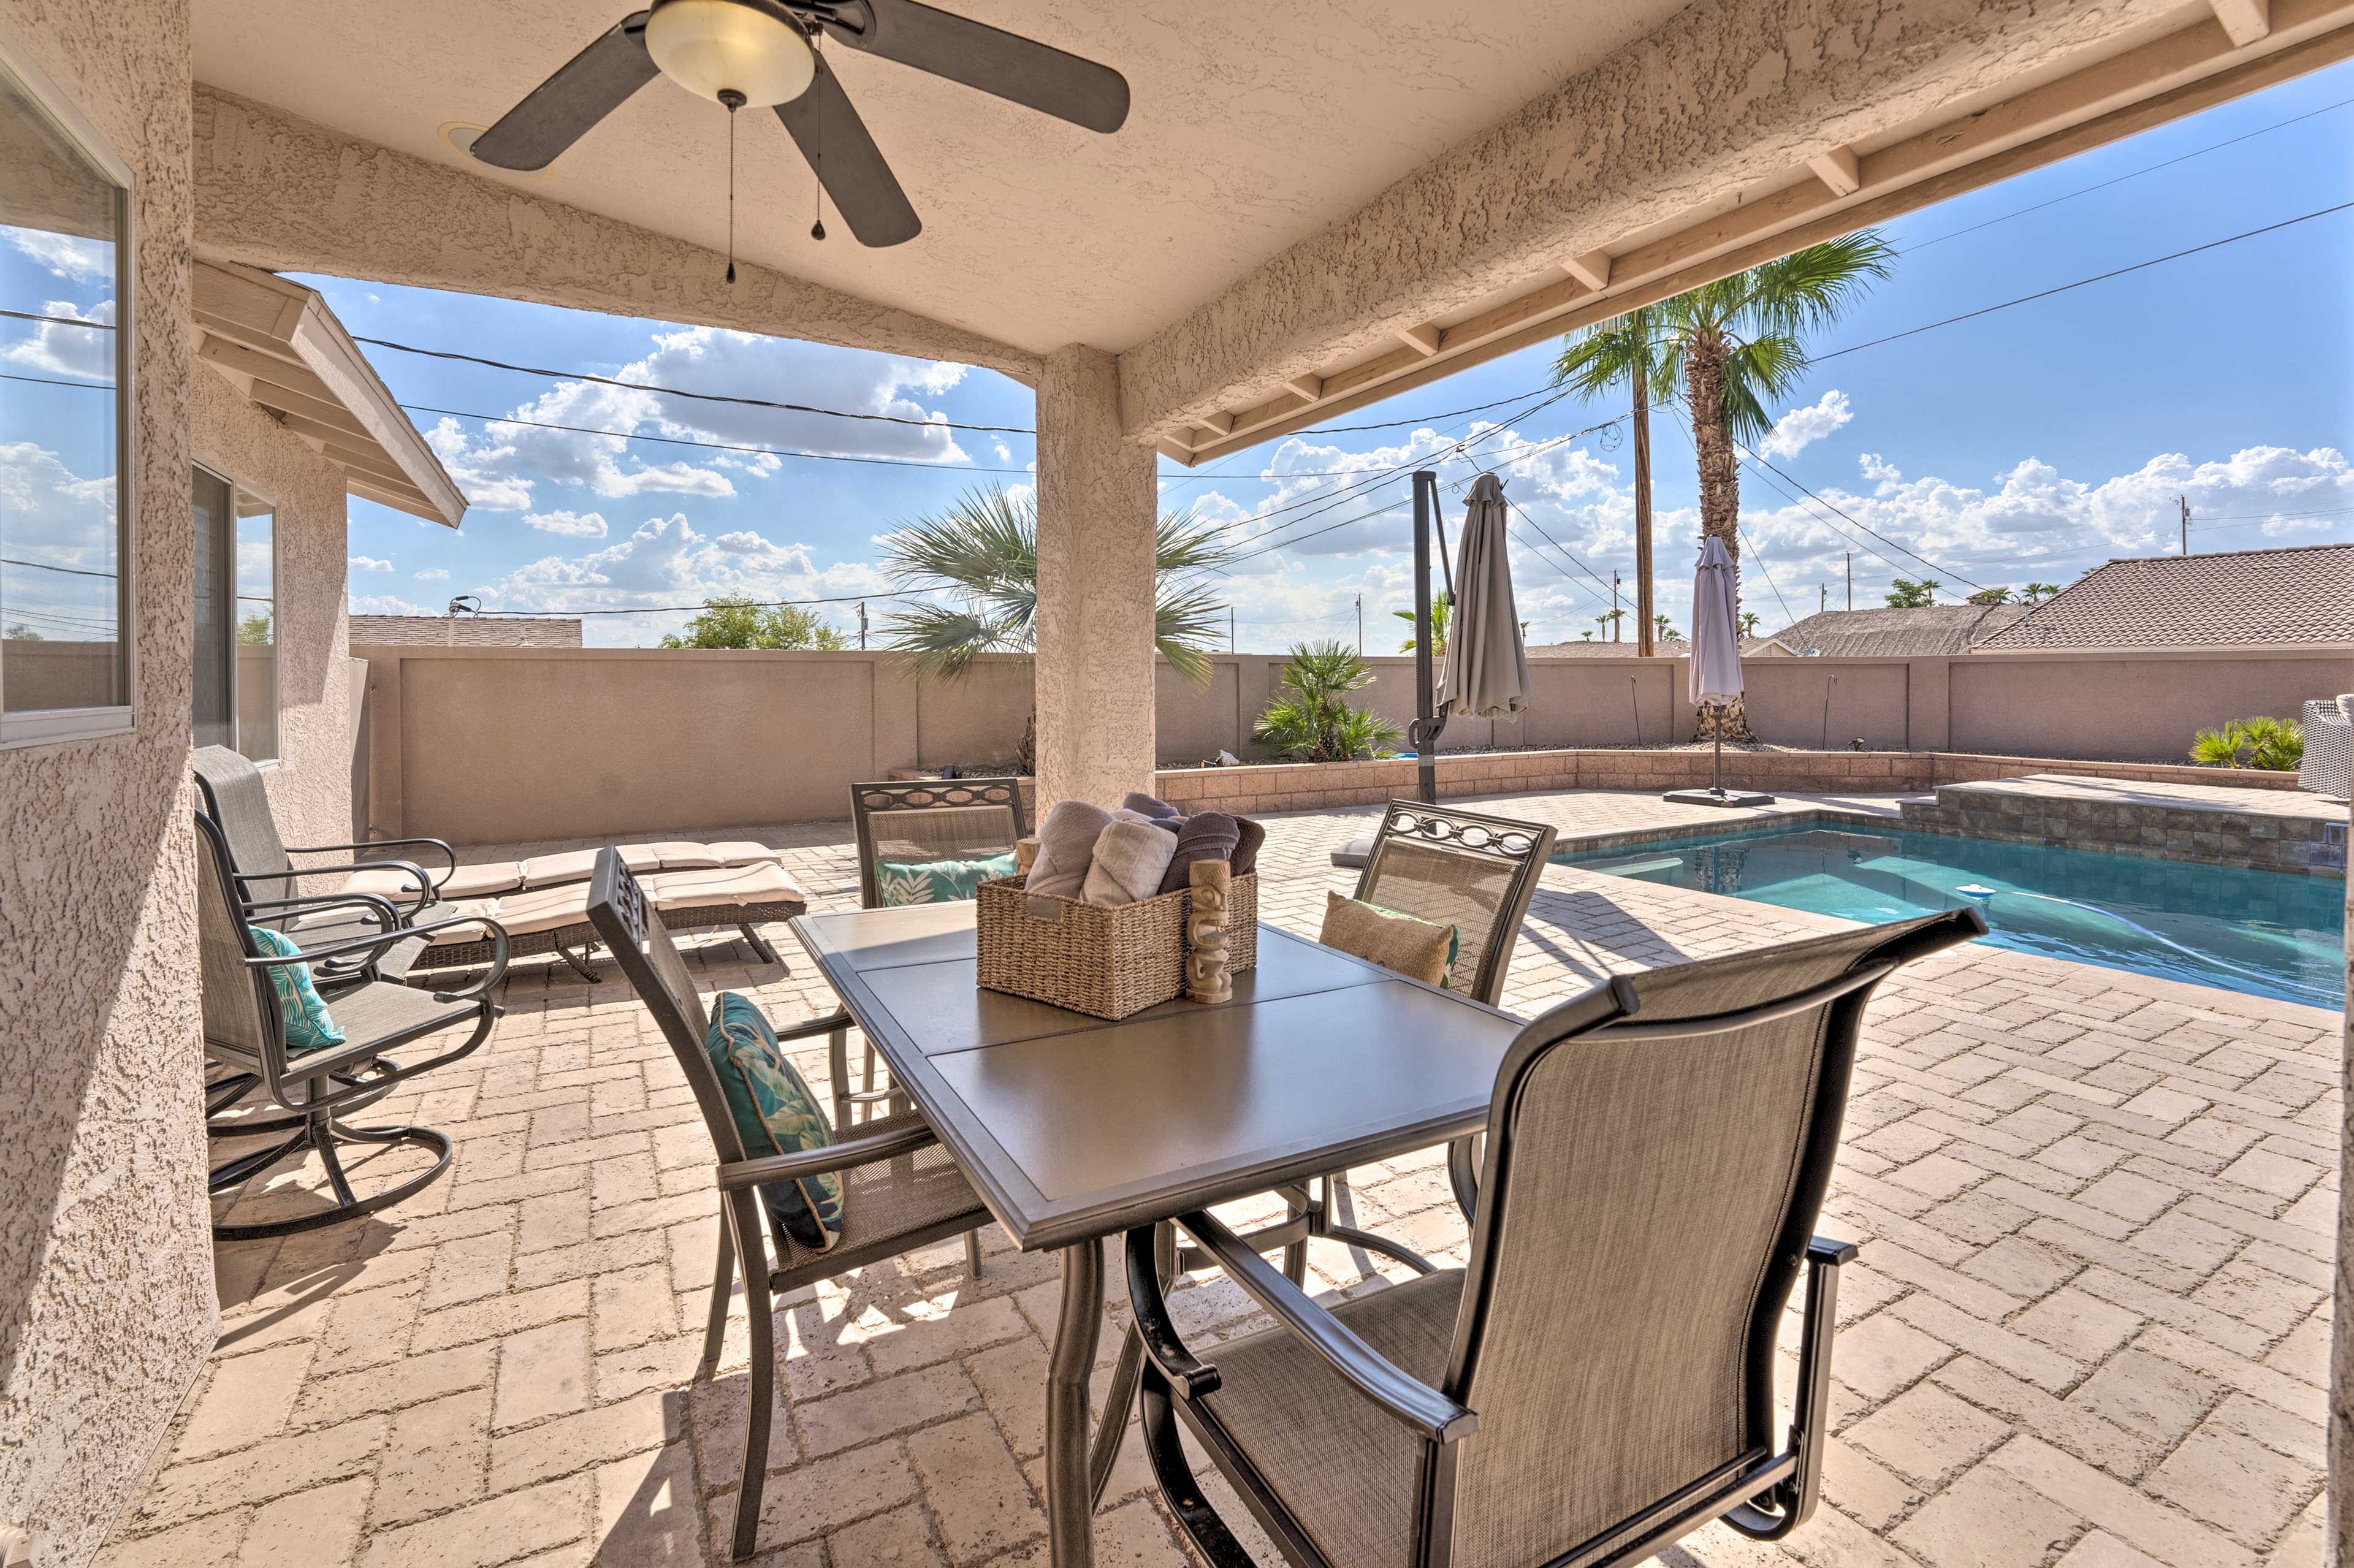 Covered Patio | Gas Grill | Private Pool